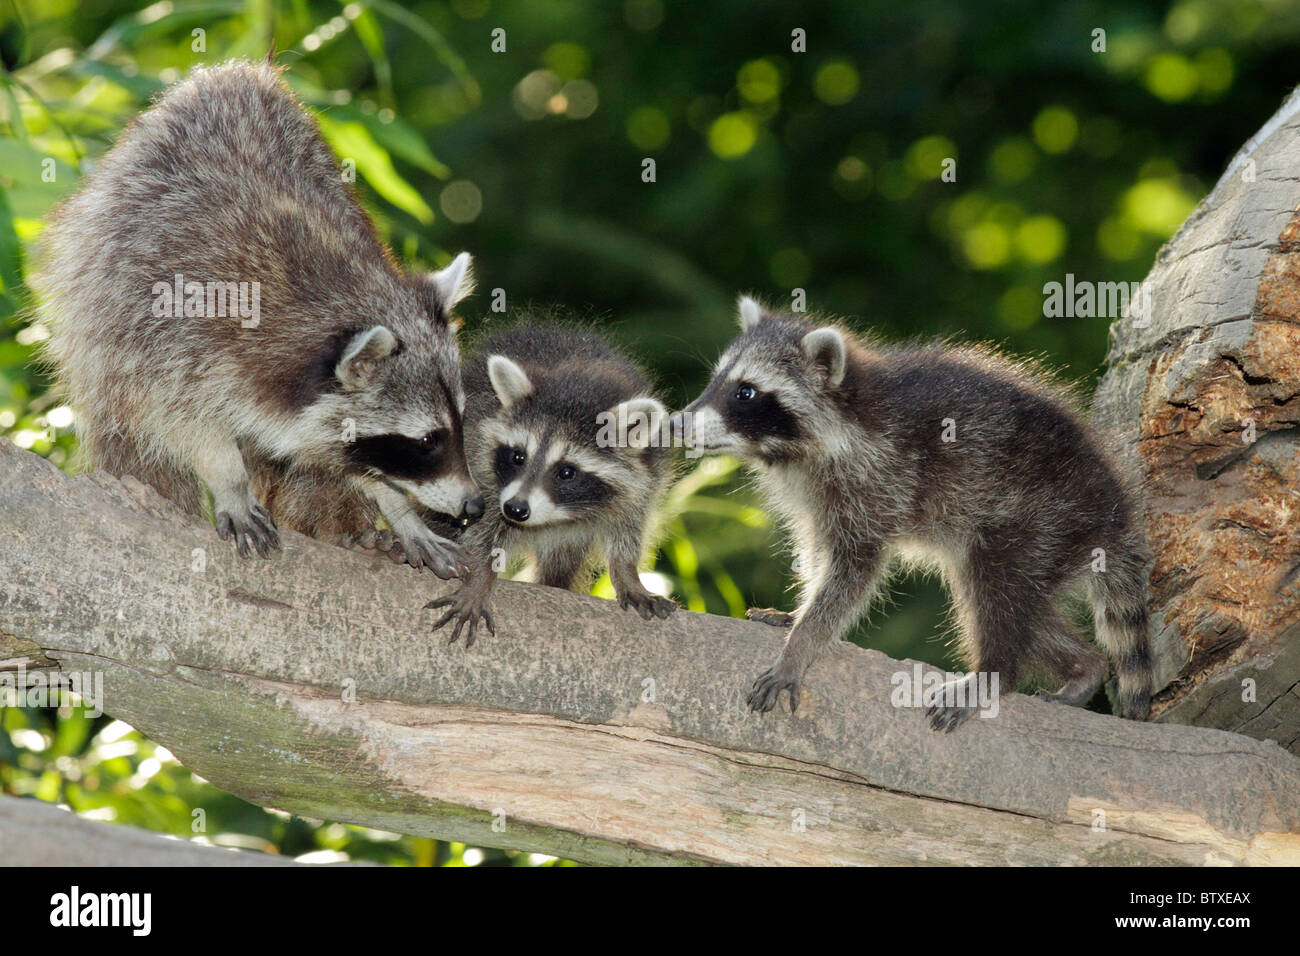 Raccoon (Procyon lotor), mother animal on branch with two baby animals, Germany Stock Photo